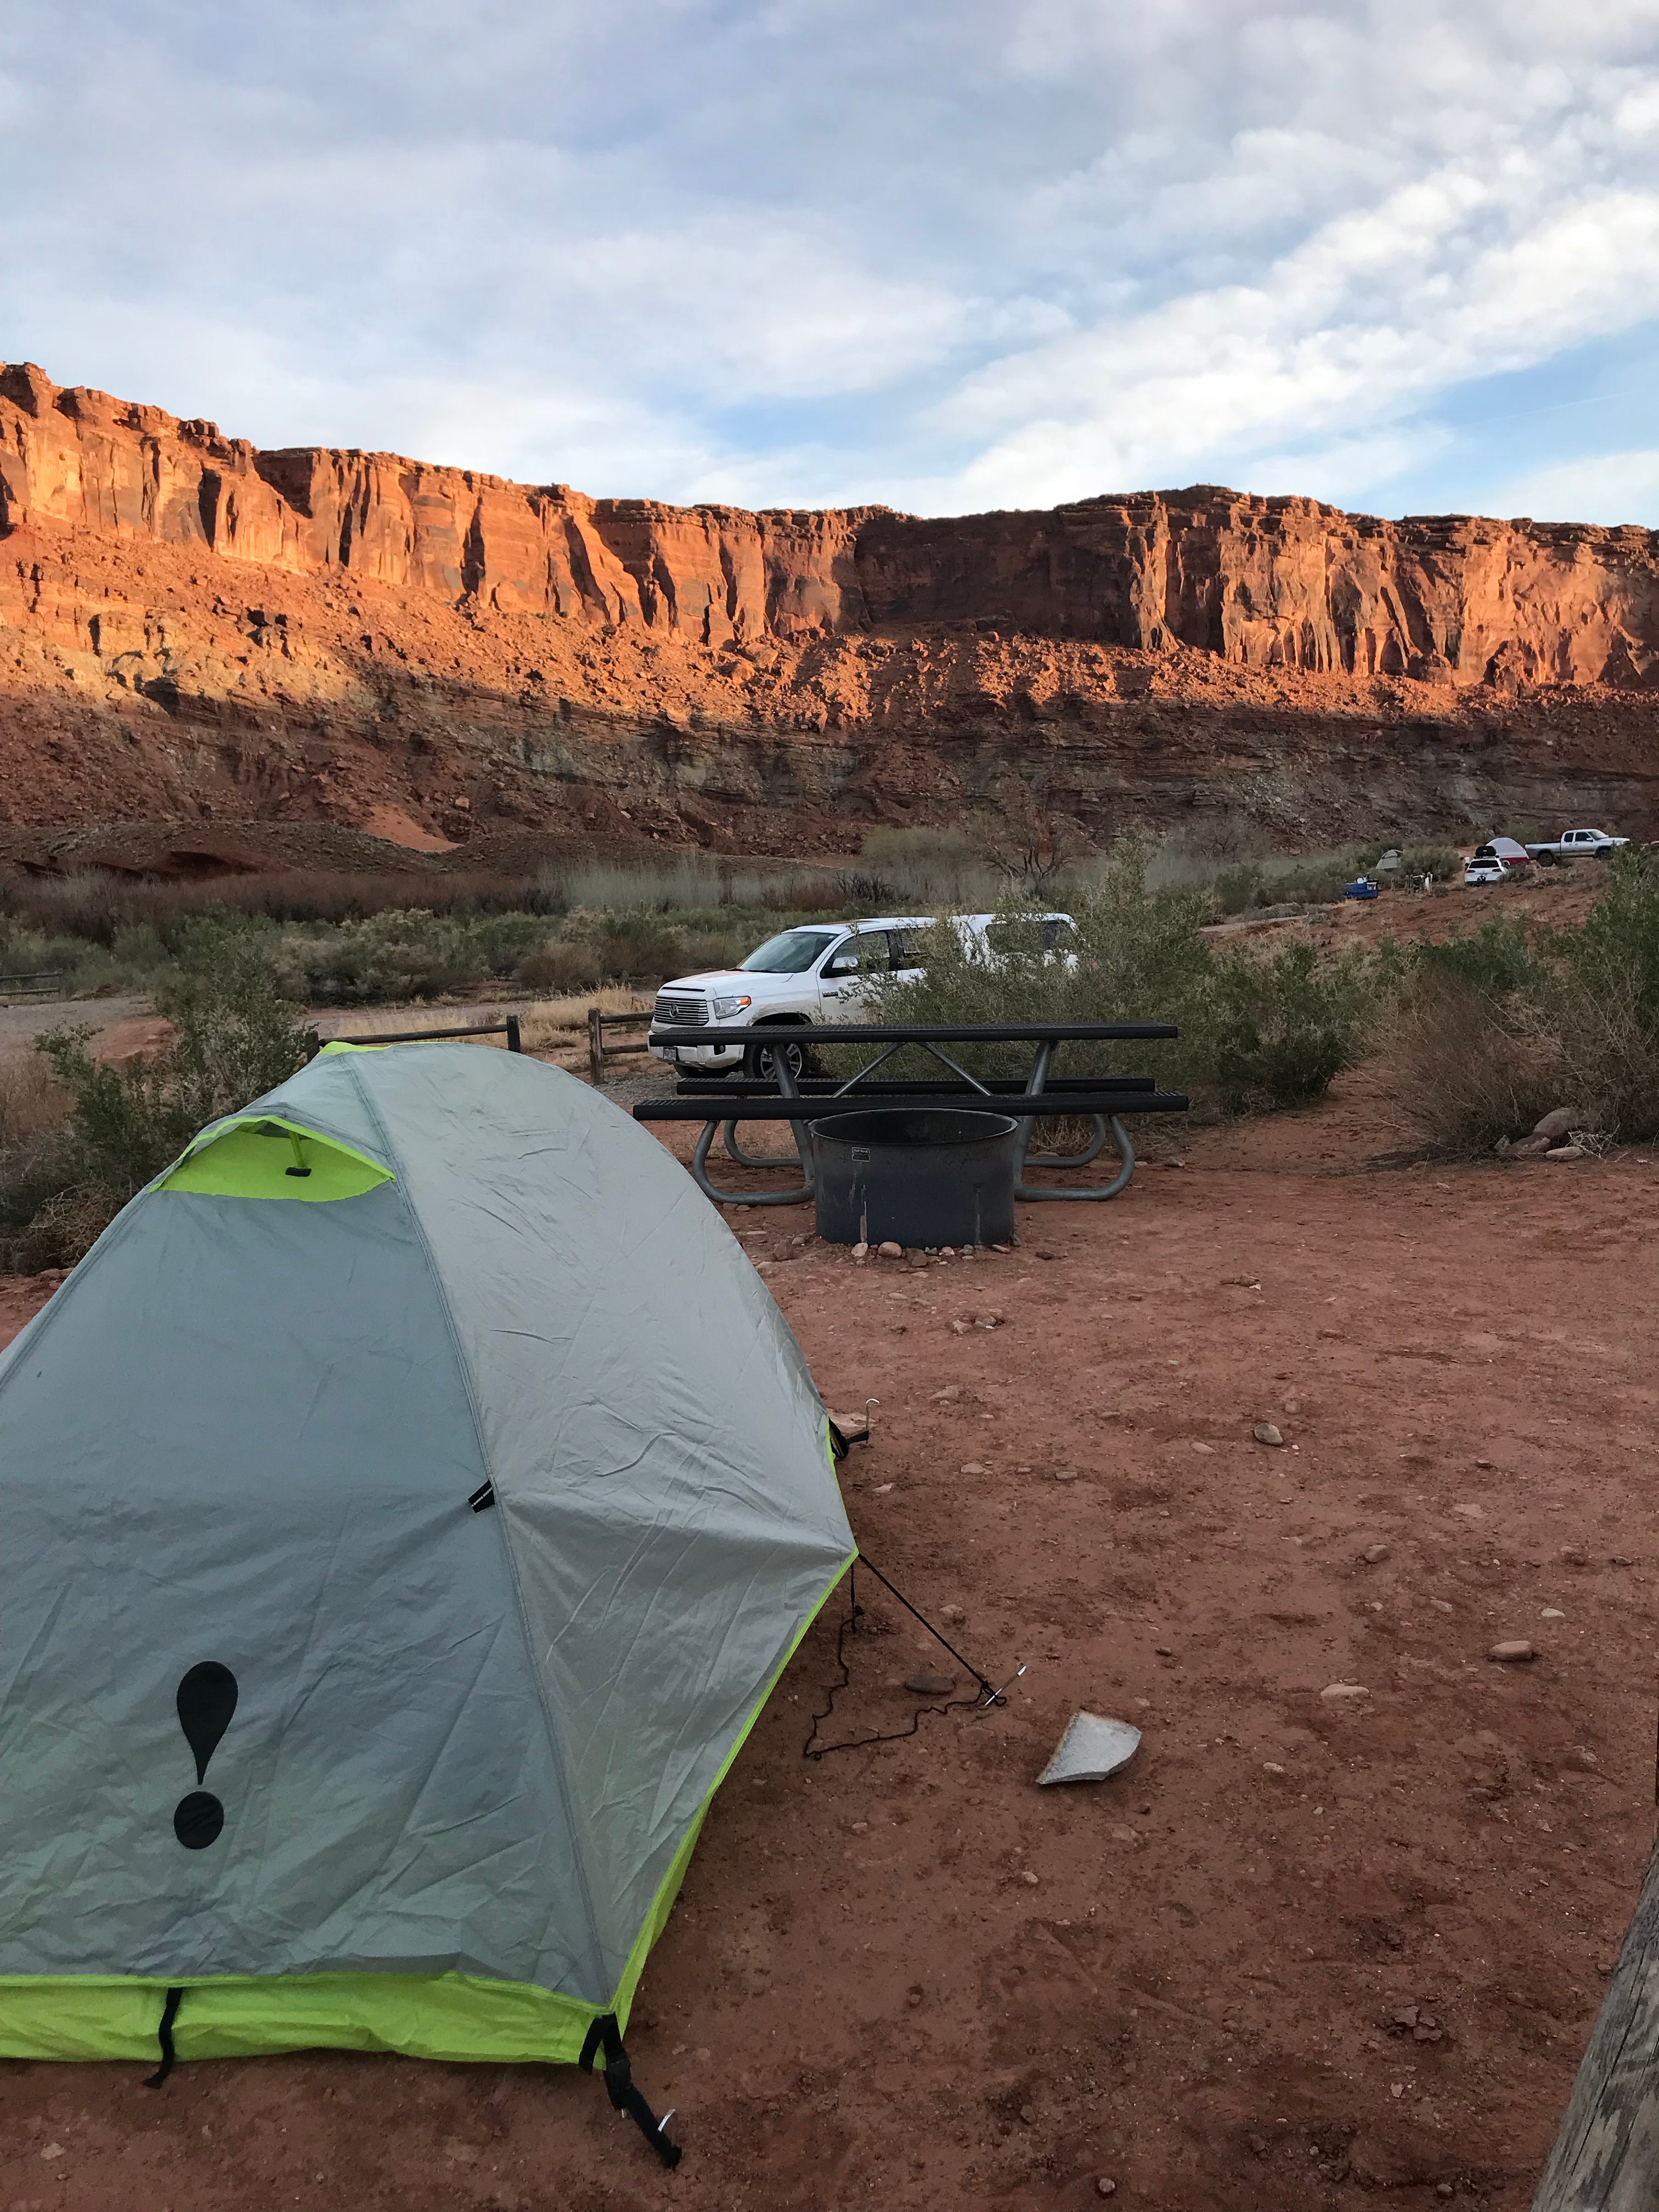 Beautiful red cliffs surround the campground. Photo shows the picnic tables and fire rings well